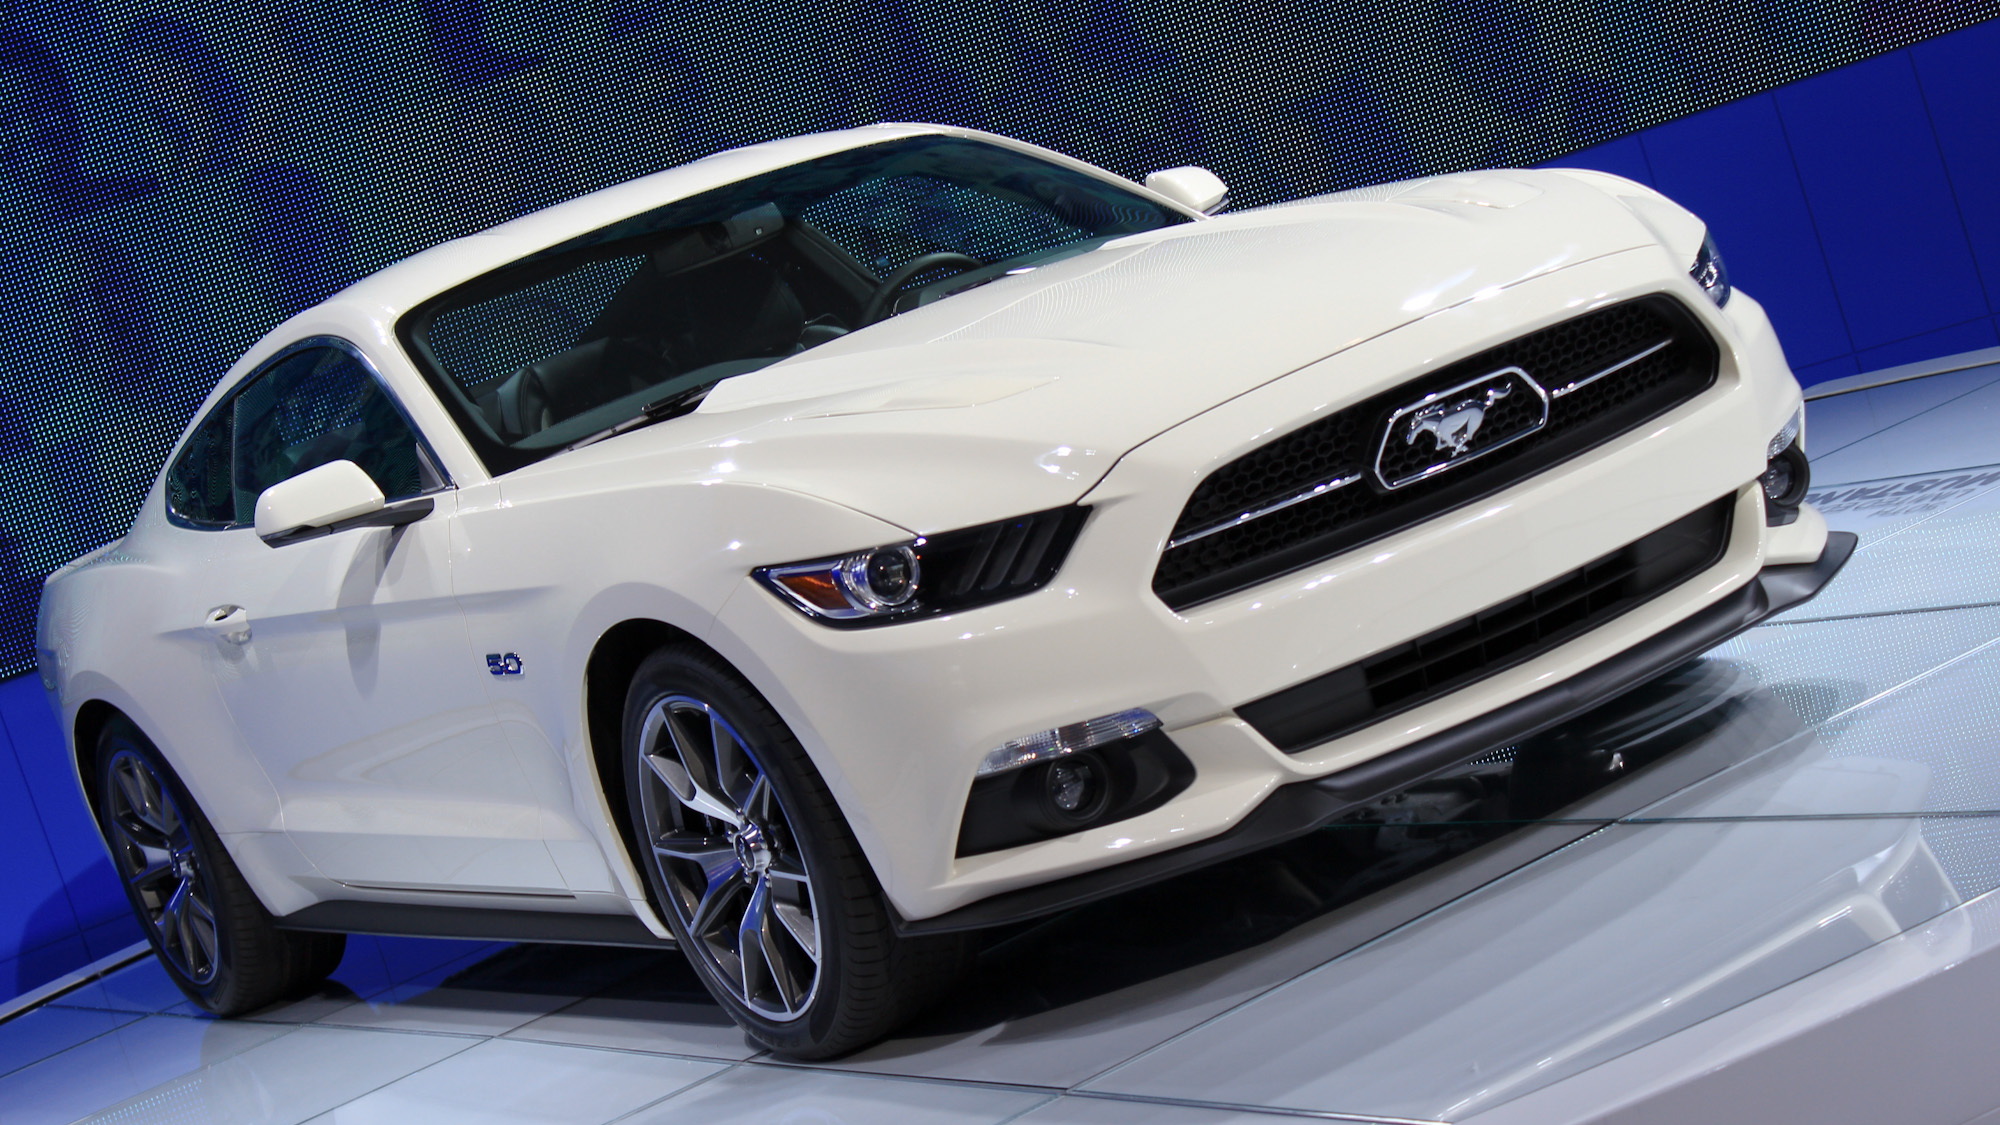 2015 Ford Mustang 50 Year Limited Edition, 2014 New York Auto Show